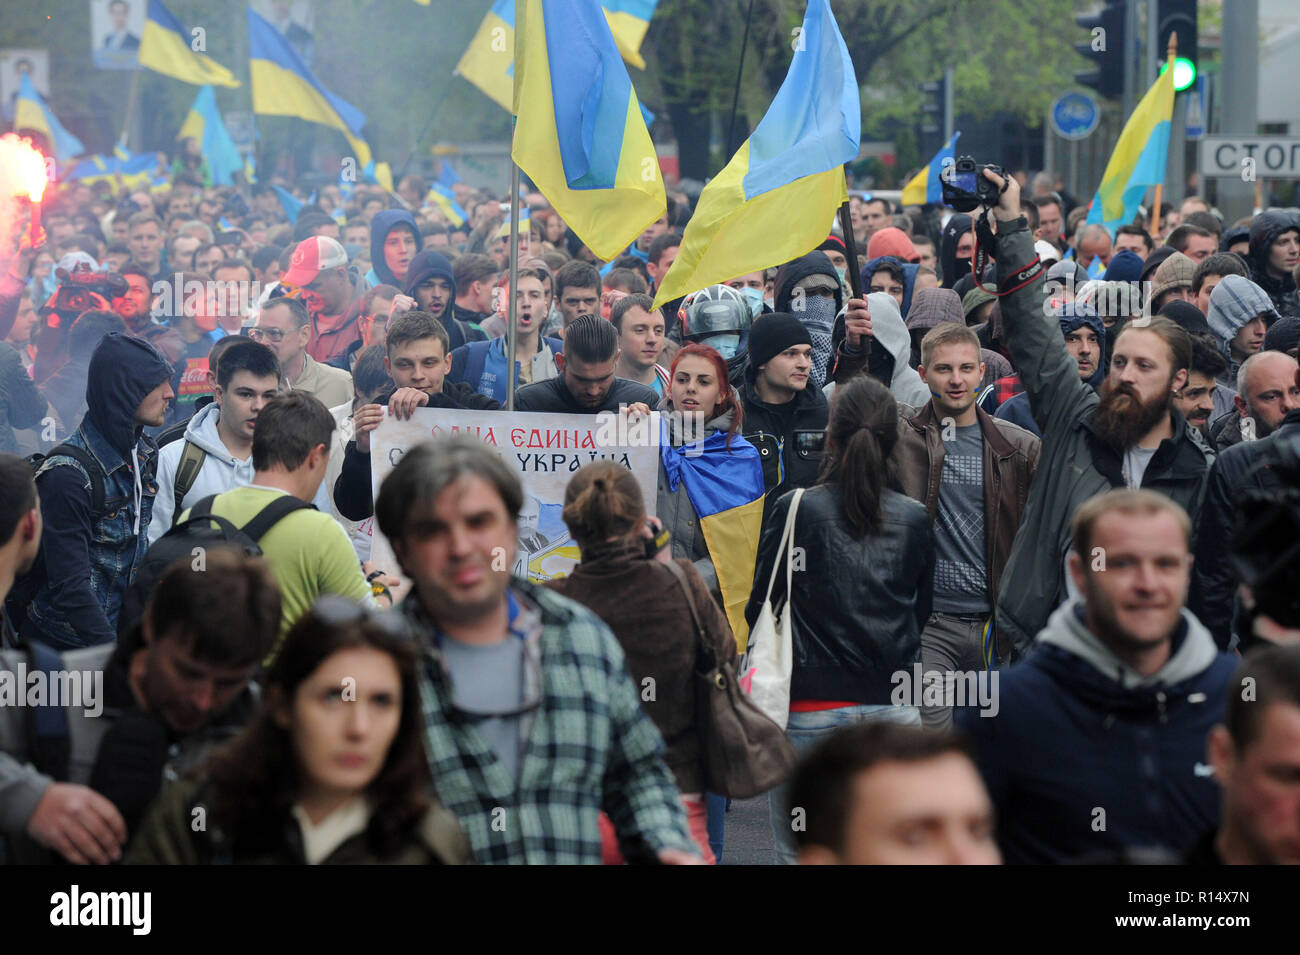 april-28-2014-donetsk-ukraine-ukrainian-citizens-in-favor-of-the-unity-of-their-country-prepare-to-demonstrate-as-tensions-rise-with-pro-russia-separatists-following-the-maidan-revolution-despite-police-protection-a-group-of-pro-russia-separatists-violently-attacked-and-dispersed-the-peaceful-demonstratorsthe-pro-russian-separatist-group-mostly-youths-in-balaclava-then-celebrated-their-actions-by-screaming-they-had-smashed-the-fascists-une-manifestation-pacifique-en-faveur-de-lunite-de-lukraine-a-donetsk-est-brutalement-dispersee-par-des-groupes-separatistes-pro-russes-armes-de-R14X7N.jpg